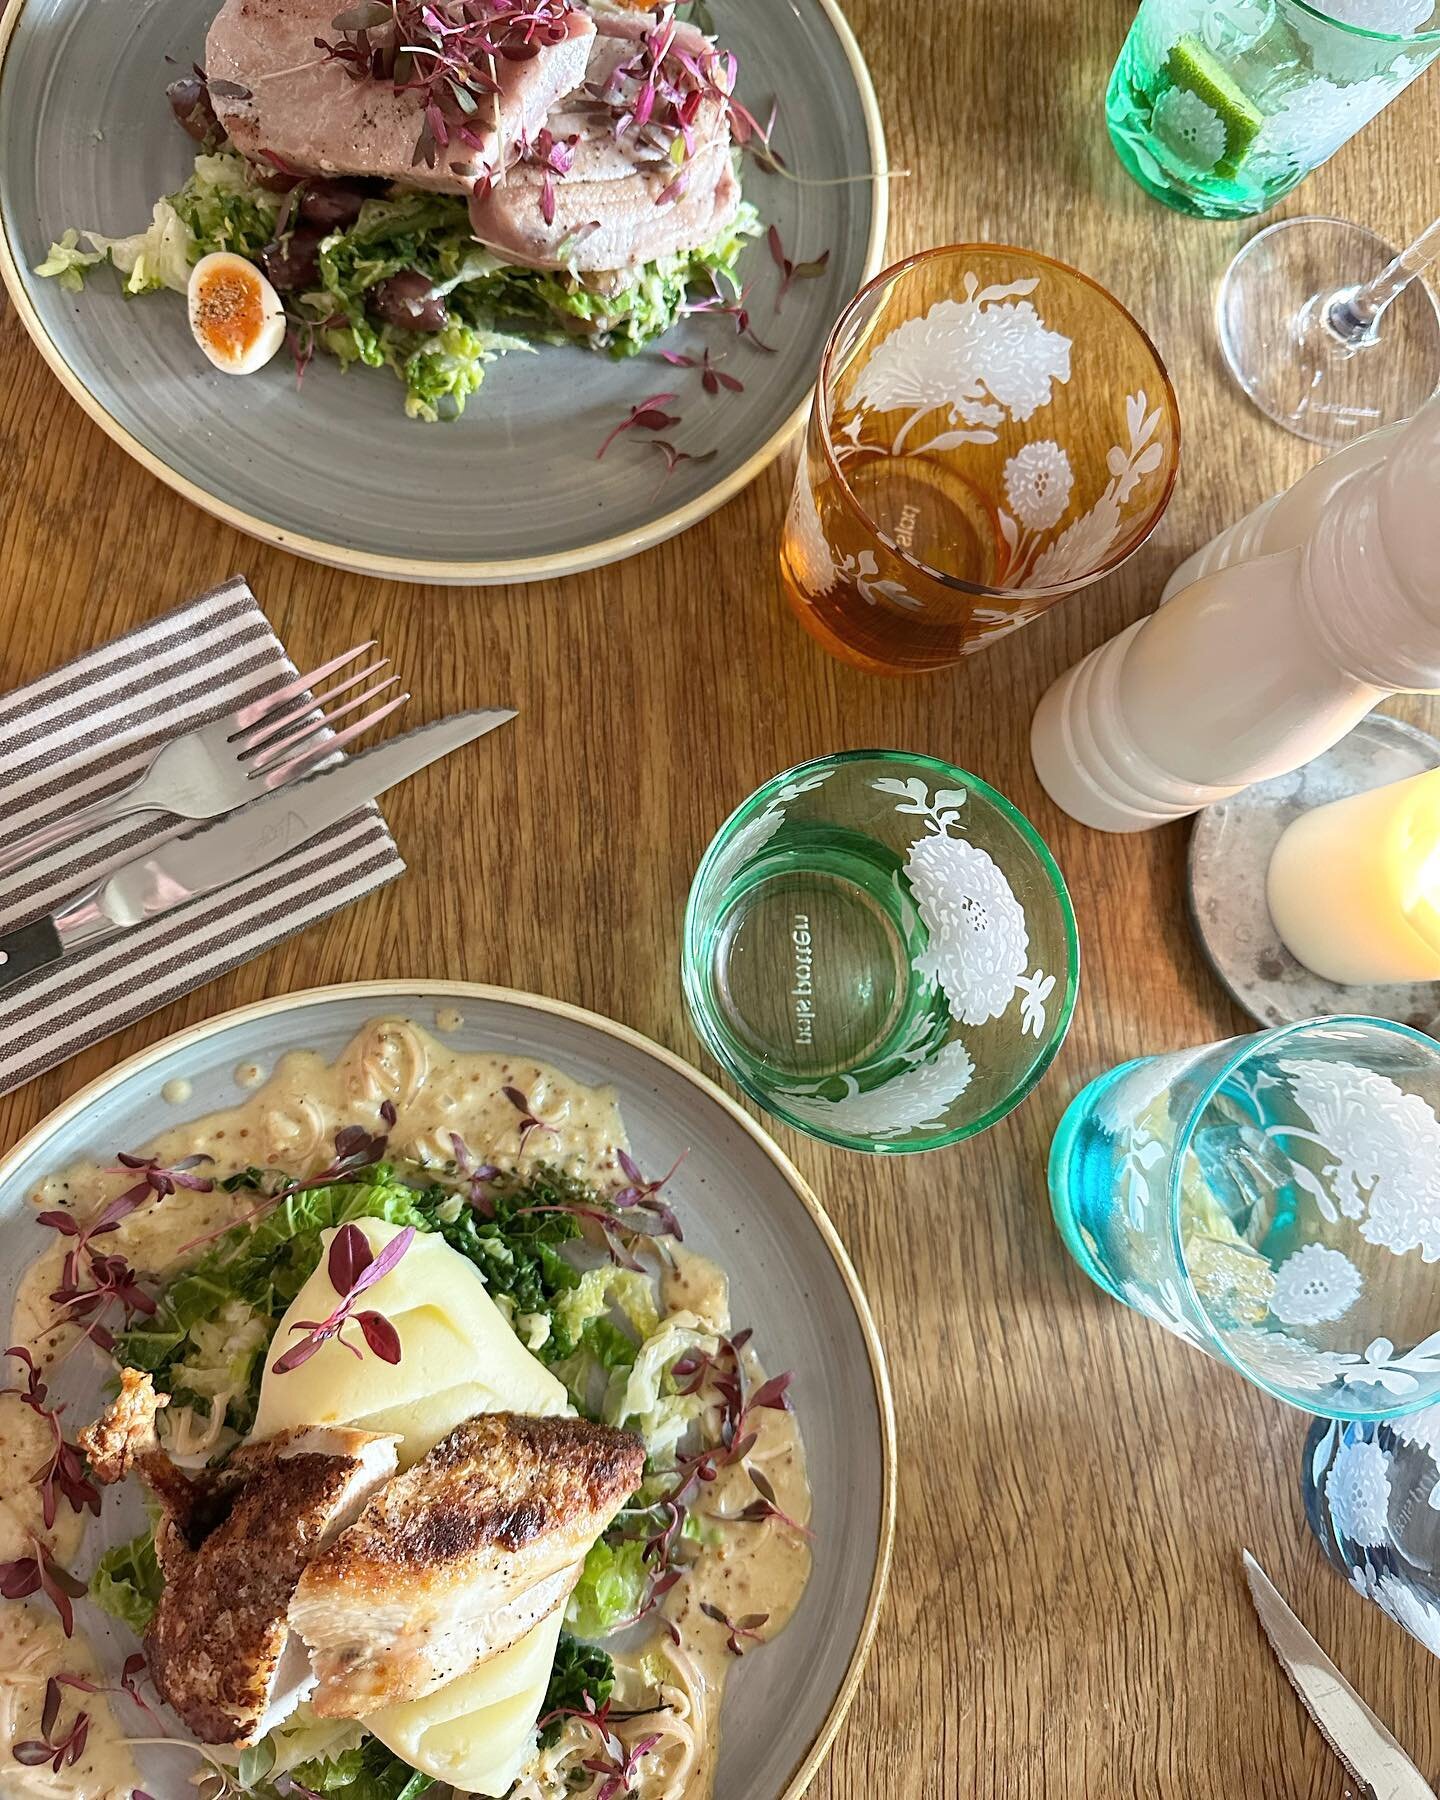 Nothing beats a long n lazy lunch, rumour has it the sun is coming out this weekend too 🍽️

Get in touch to book any tables&hellip;
💌 hello@thethreehorseshoesbighton.co.uk 
☎️ 01962 735876 
💬 or message us on here! 

#thethreehorseshoesbighton #th